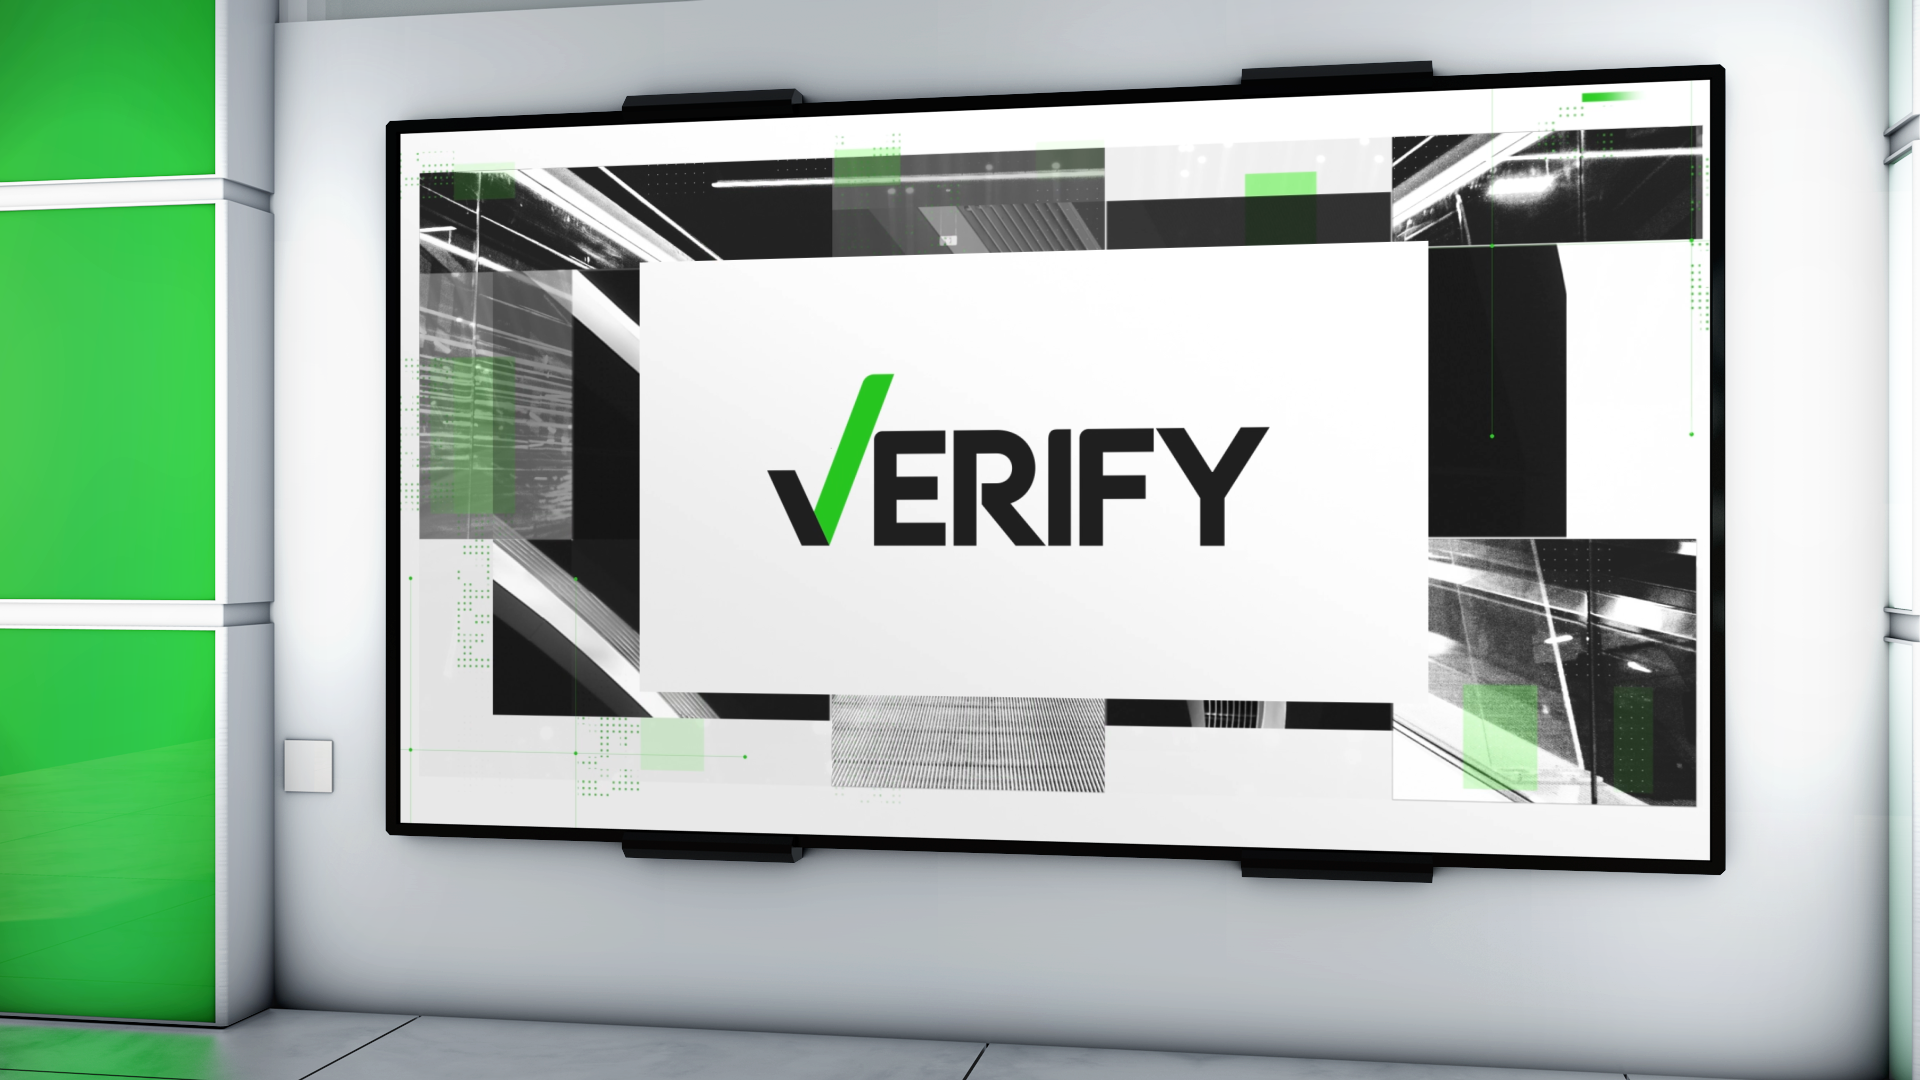 See something on social media you want verified? Our VERIFY team is here to help you.